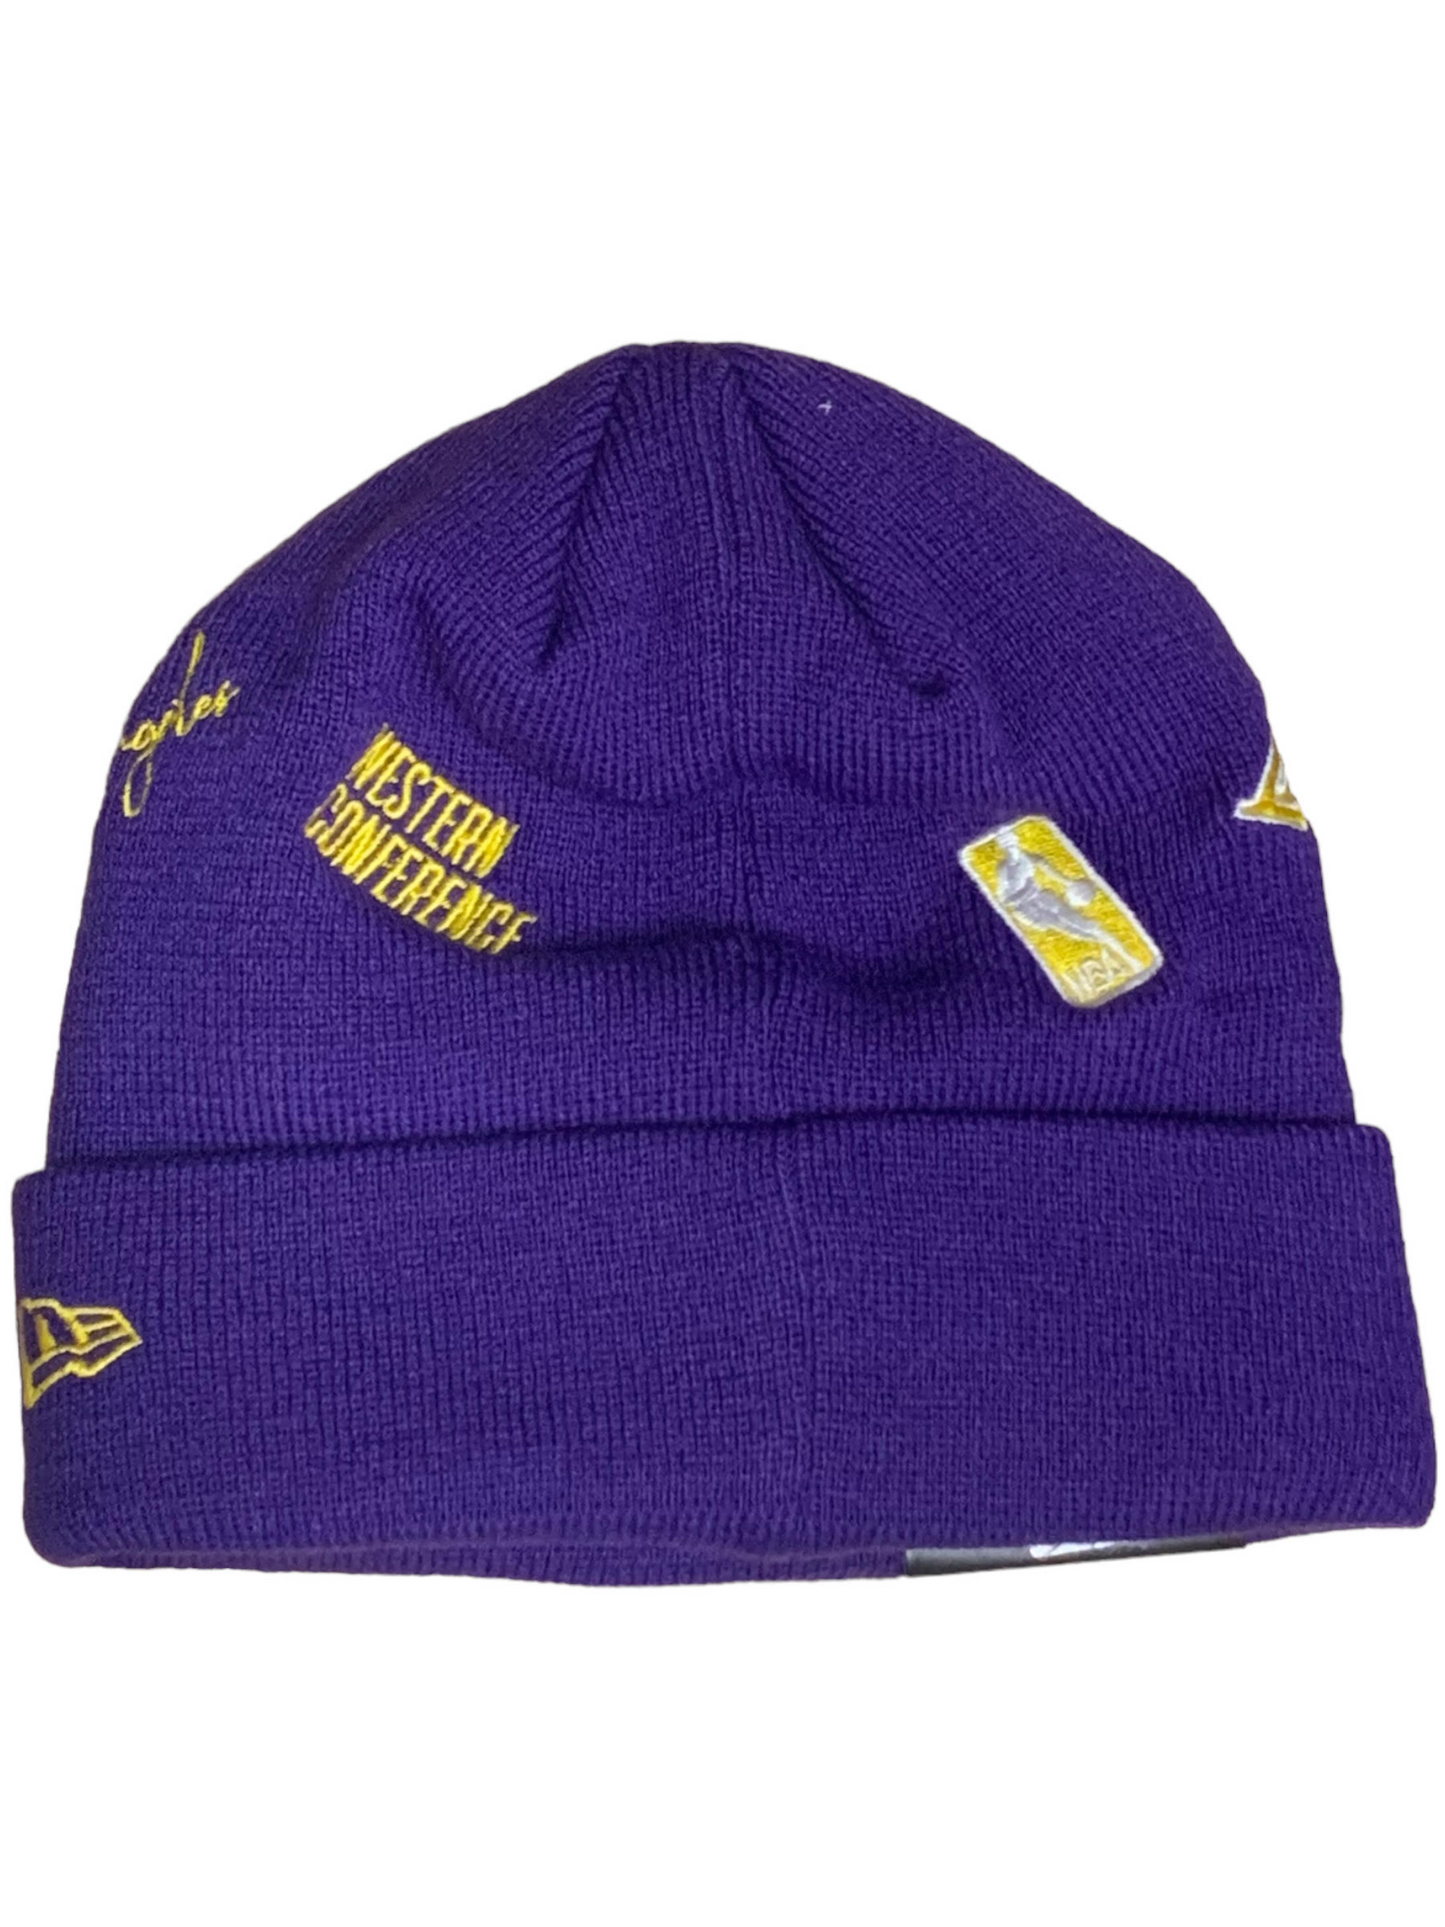 LOS ANGELES LAKERS IDENTITY KNIT BEANIE HAT